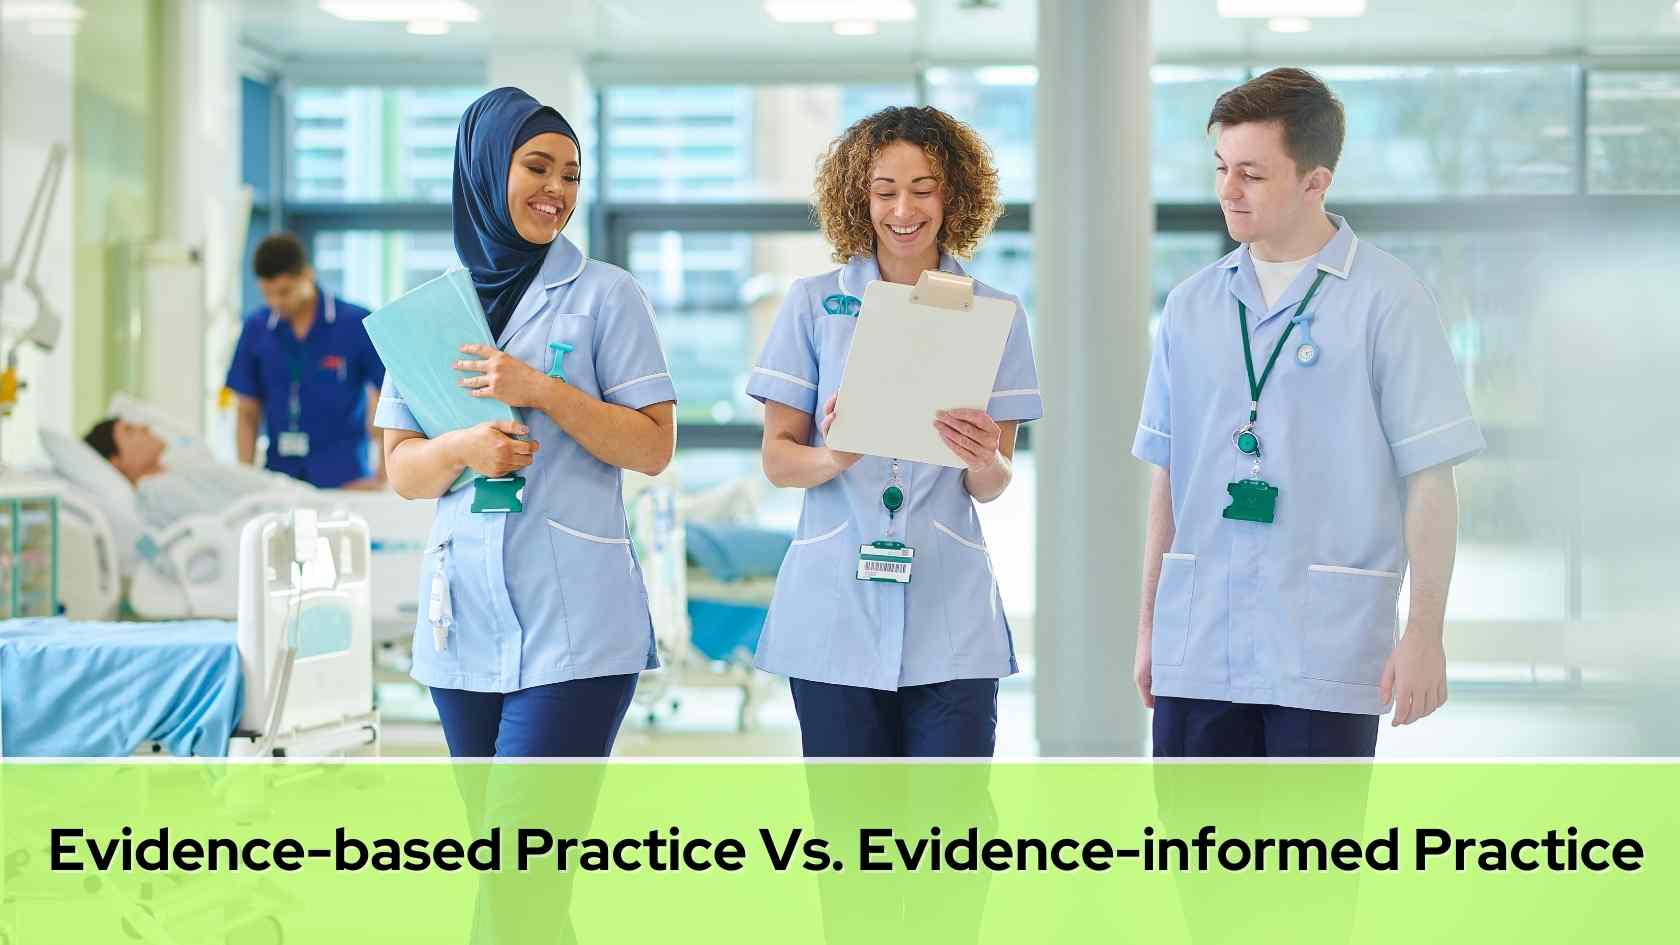 What is the Difference Between Evidence-based Practice and Evidence-informed Practice?